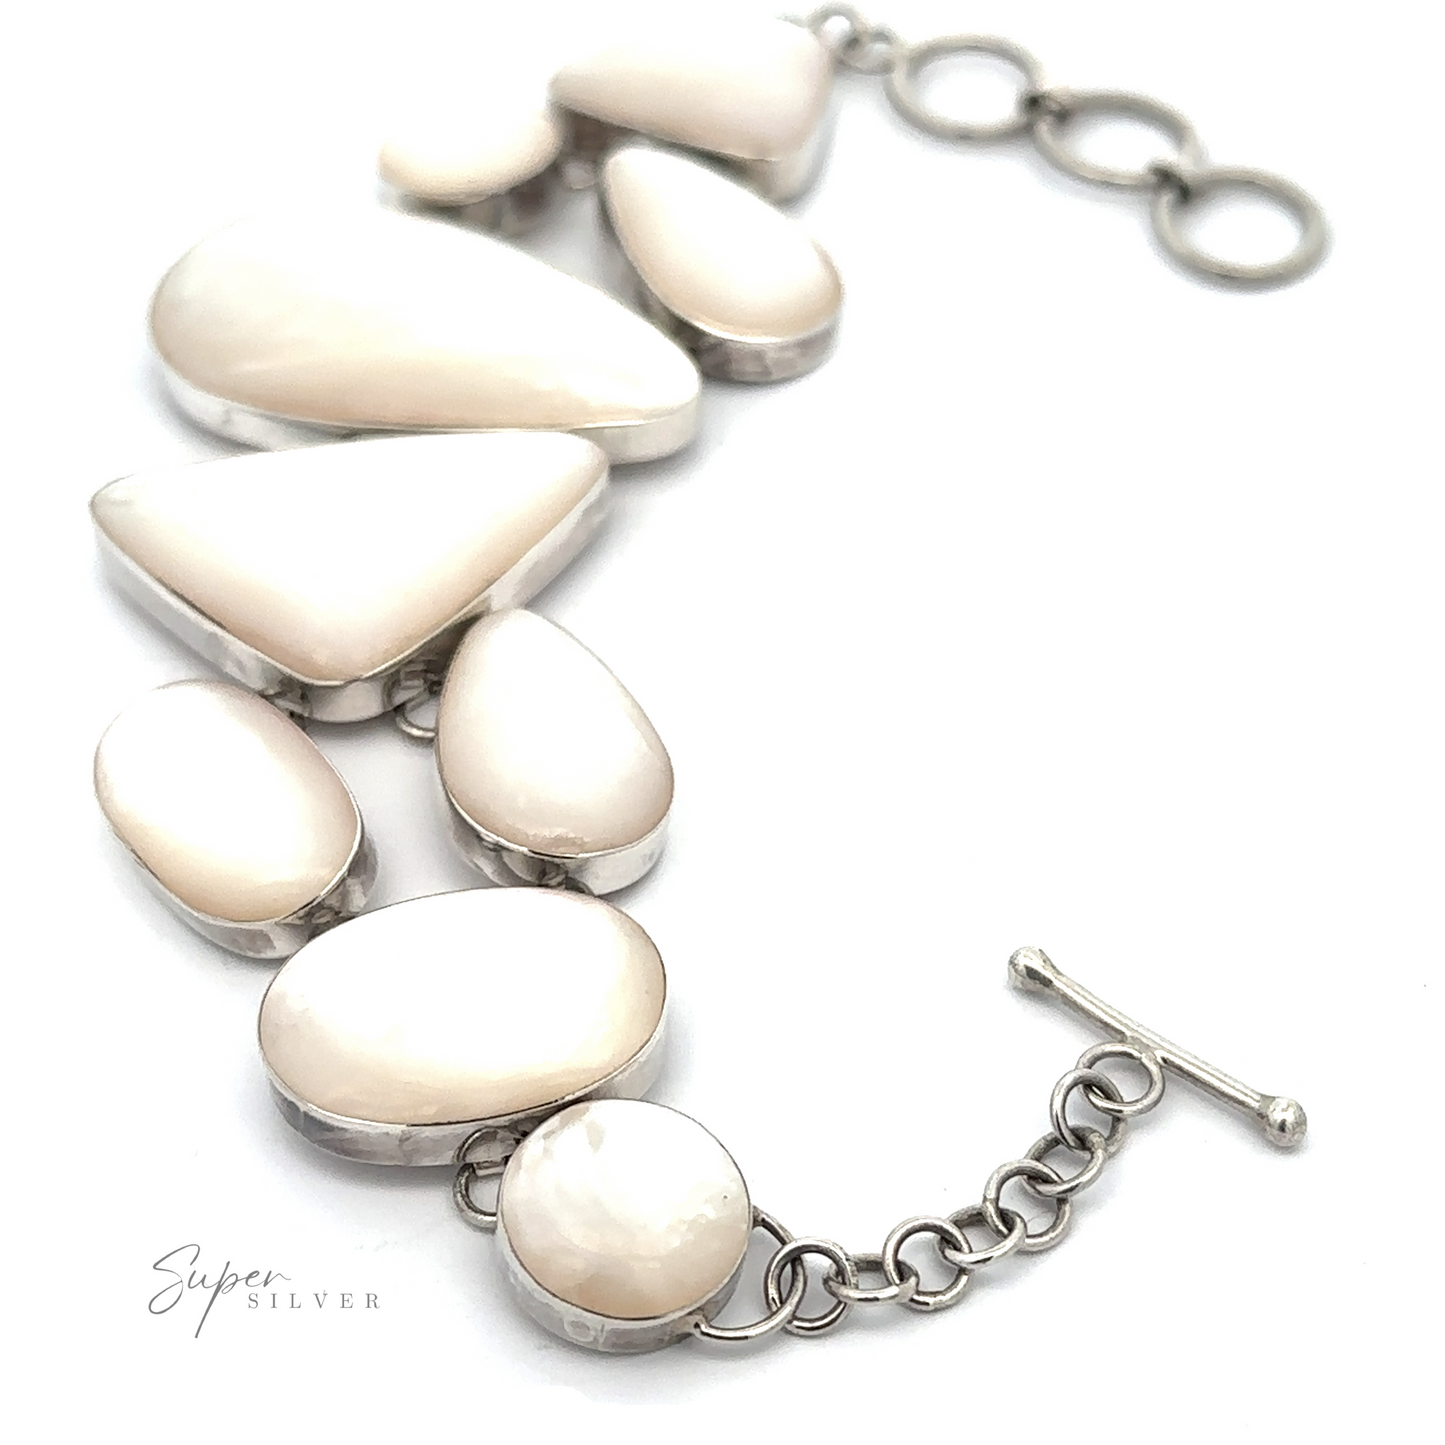 A Statement Mother of Pearl Bracelet crafted from sterling silver, featuring seven white Mother-of-Pearl stones of varying shapes linked by a delicate chain and a toggle clasp.